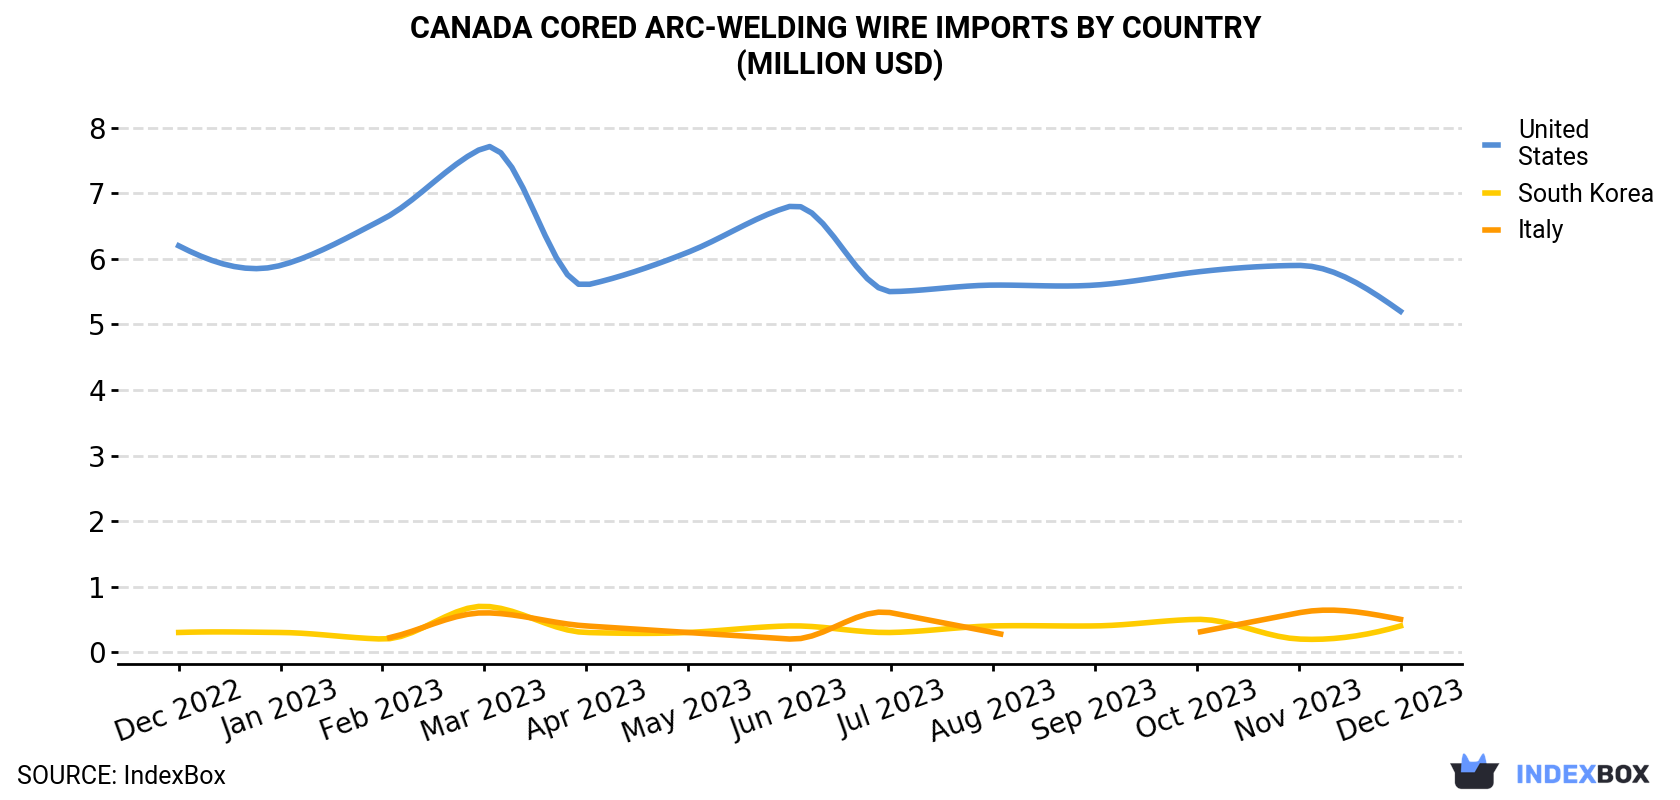 Canada Cored Arc-Welding Wire Imports By Country (Million USD)